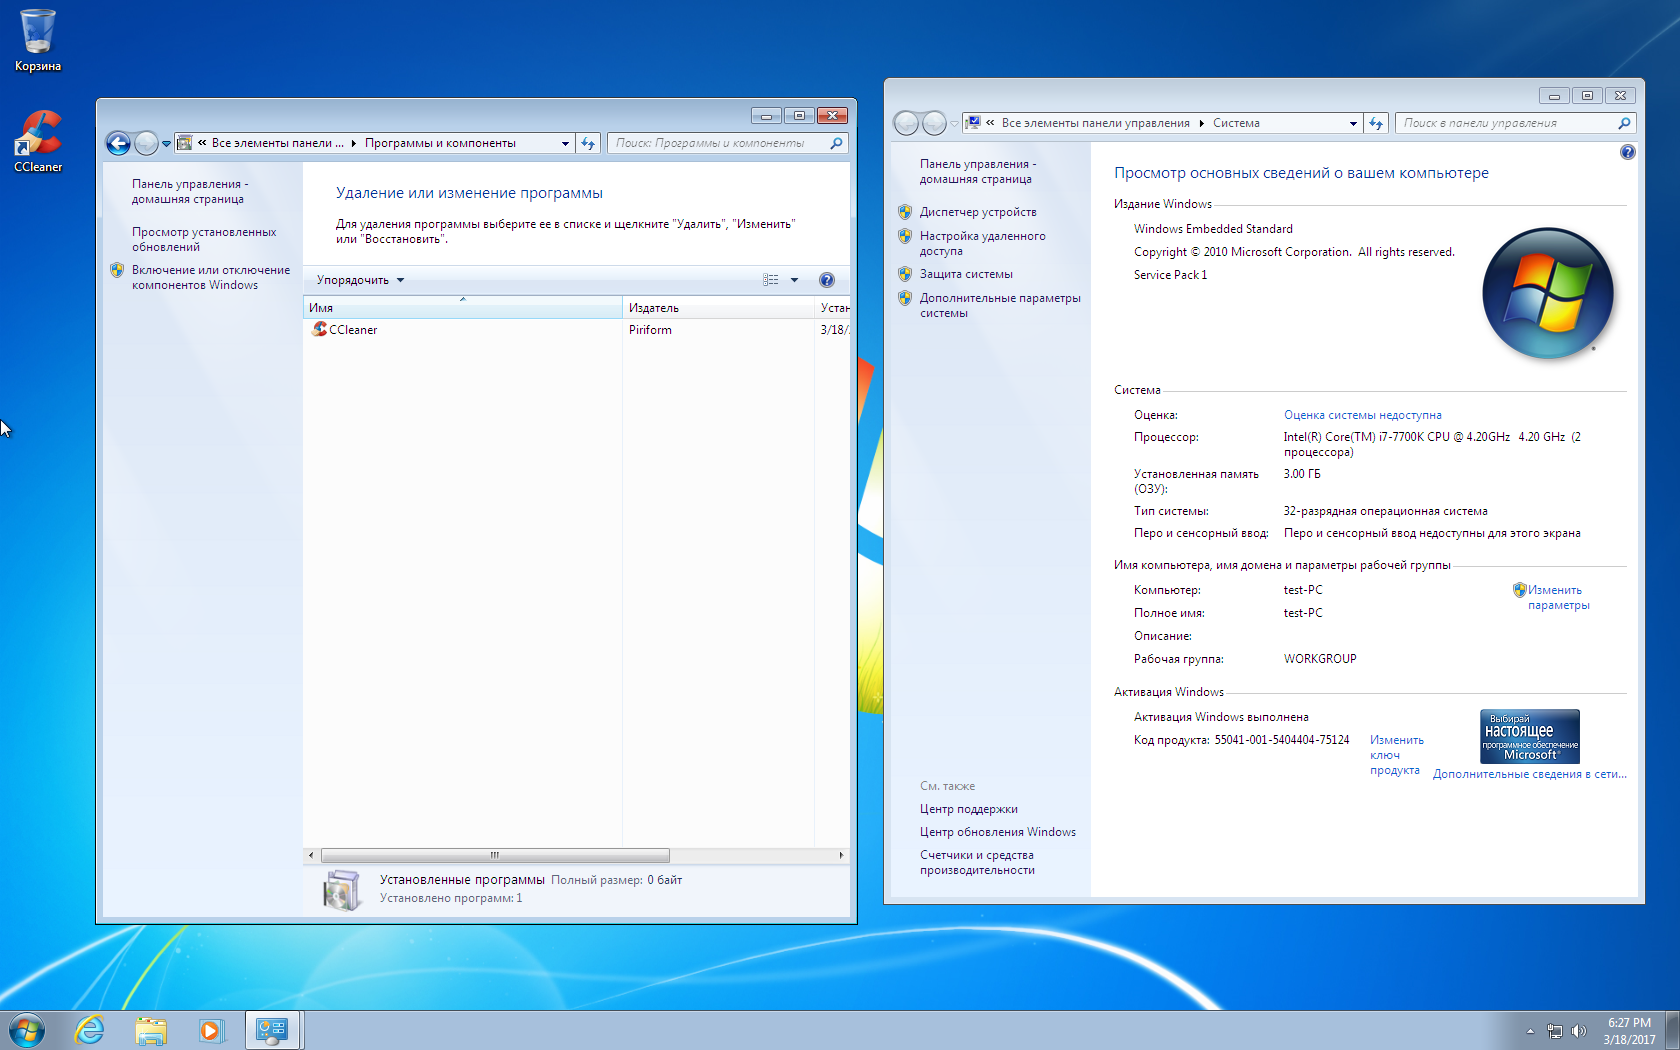 Browser For Windows Embedded Compact 7 Productivity